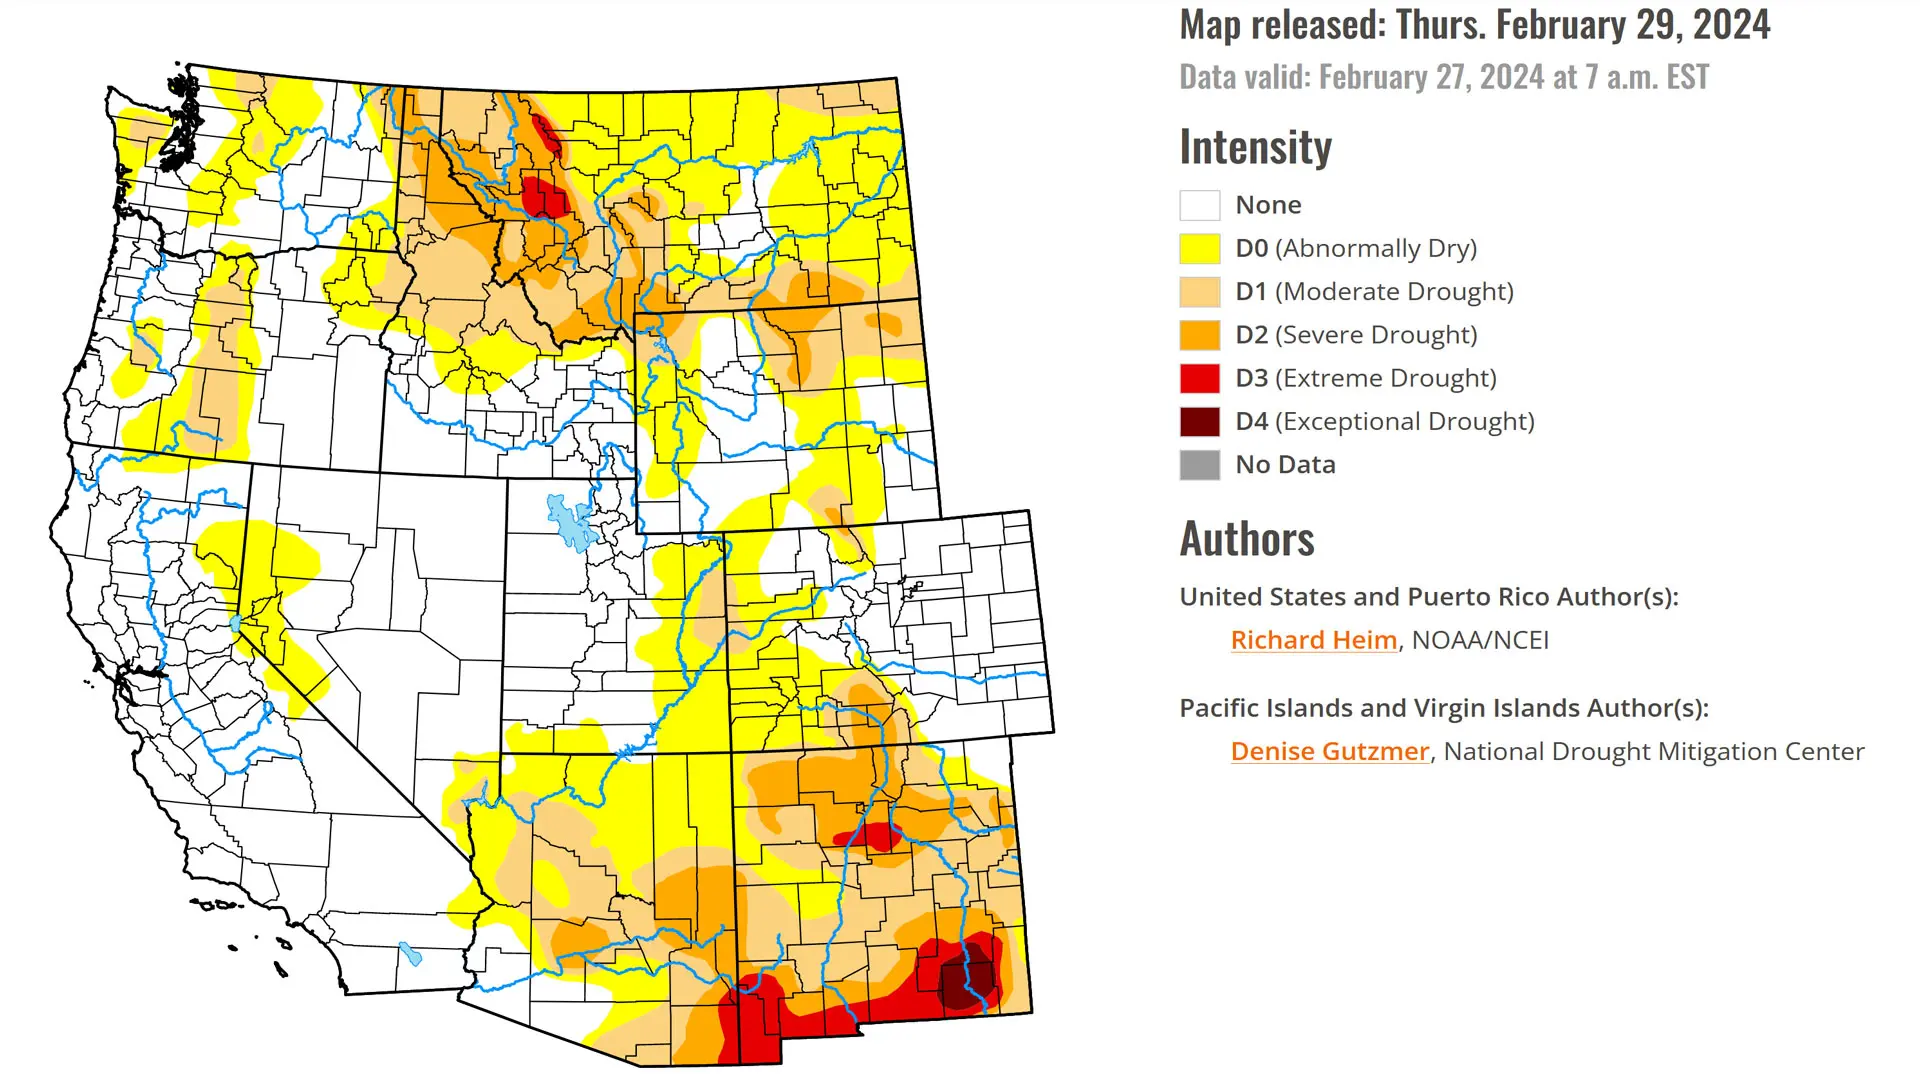 Latest drought update as of February 27, 2024.